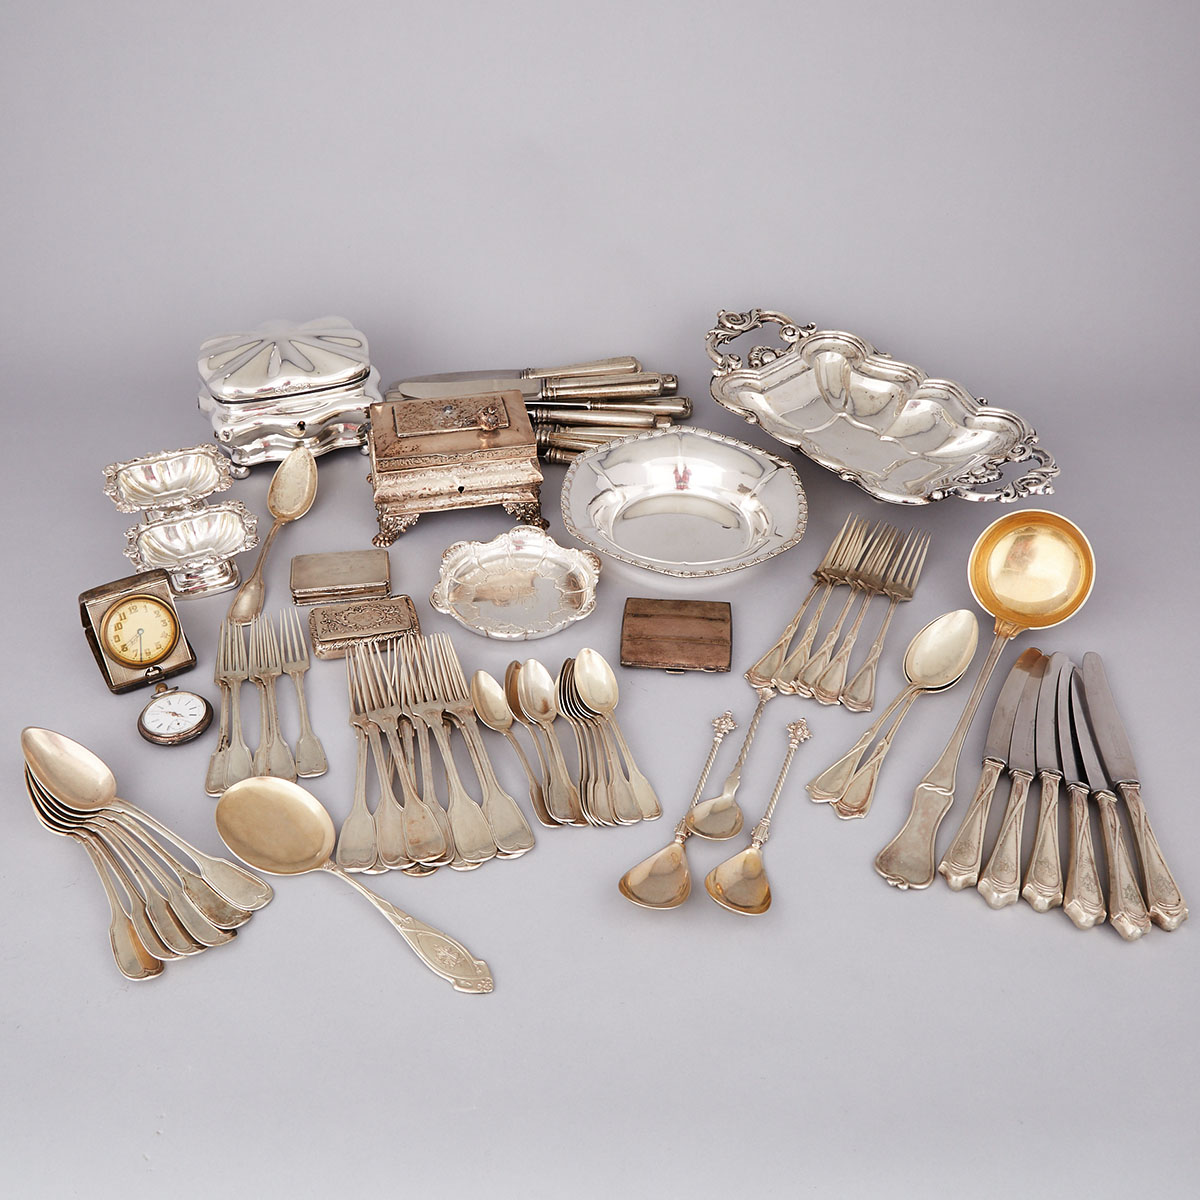 Group of Mainly German and other Continental Silver and Silver Plate, 19th/20th century